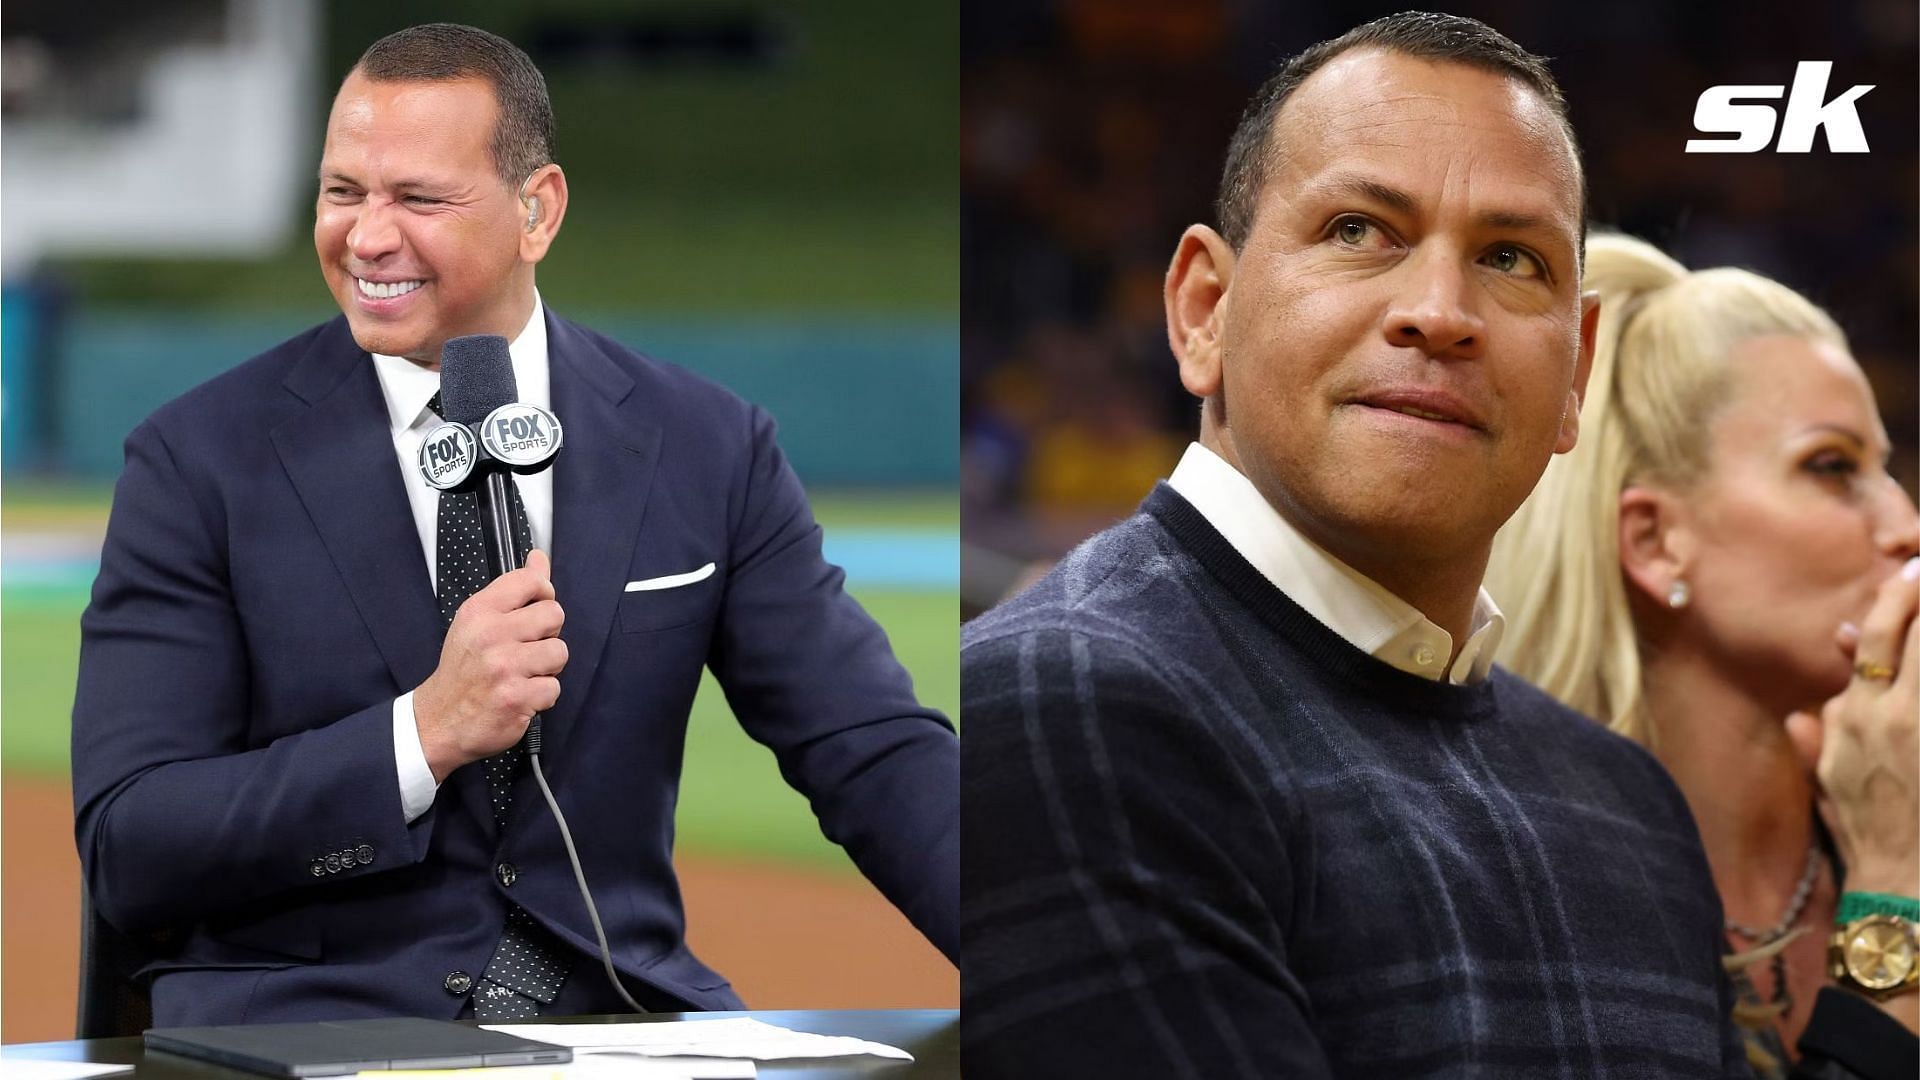 Former New York Yankees slugger Alex Rodriguez has shown his support for the Jewish community amid Gaza Strip conflict